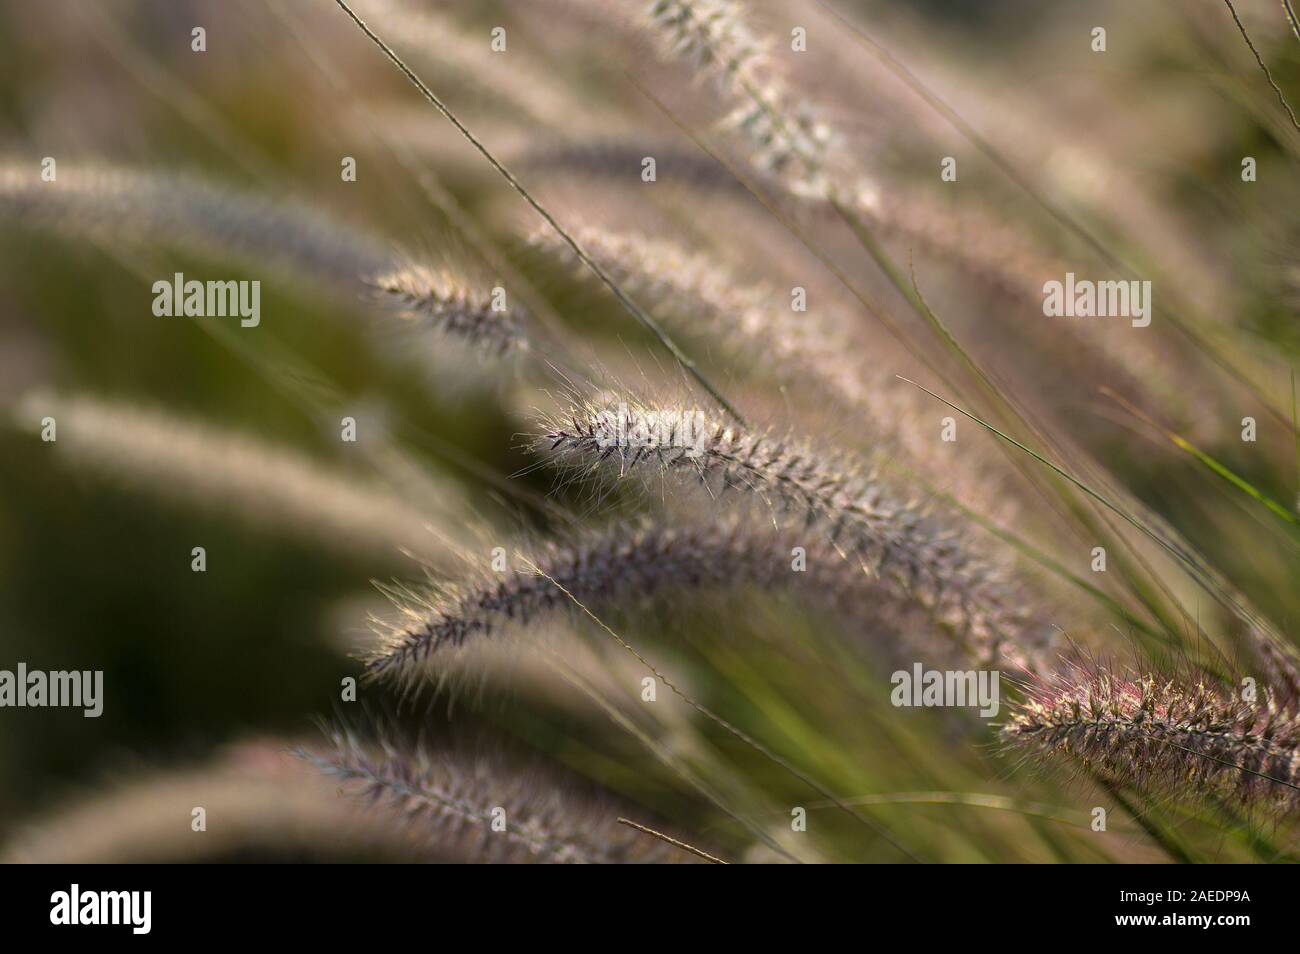 Fountain Grass Ornamental Plant in Garden with soft focus background Stock Photo